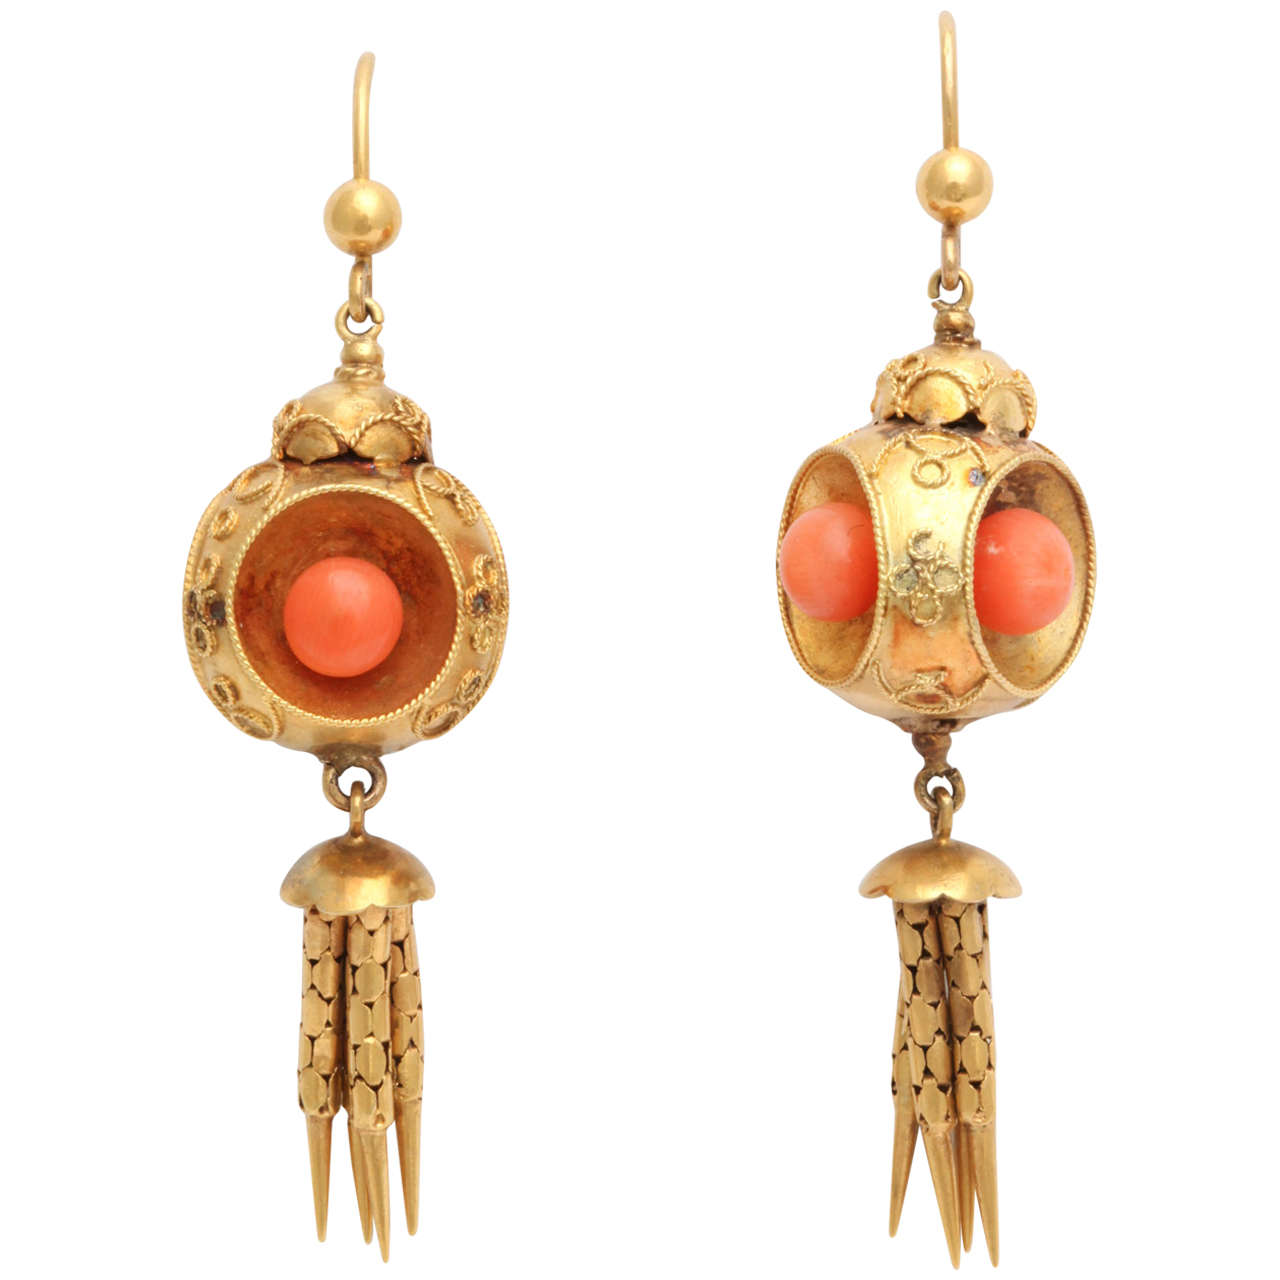 These gorgeous Victorian coral and gold earrings, circa 1870 are designed as 18k gold spheres with granulation suspending hi-karat gold tassels.

Victorian, circa 1870.

2 1/4 in. (5.7 cm) long.